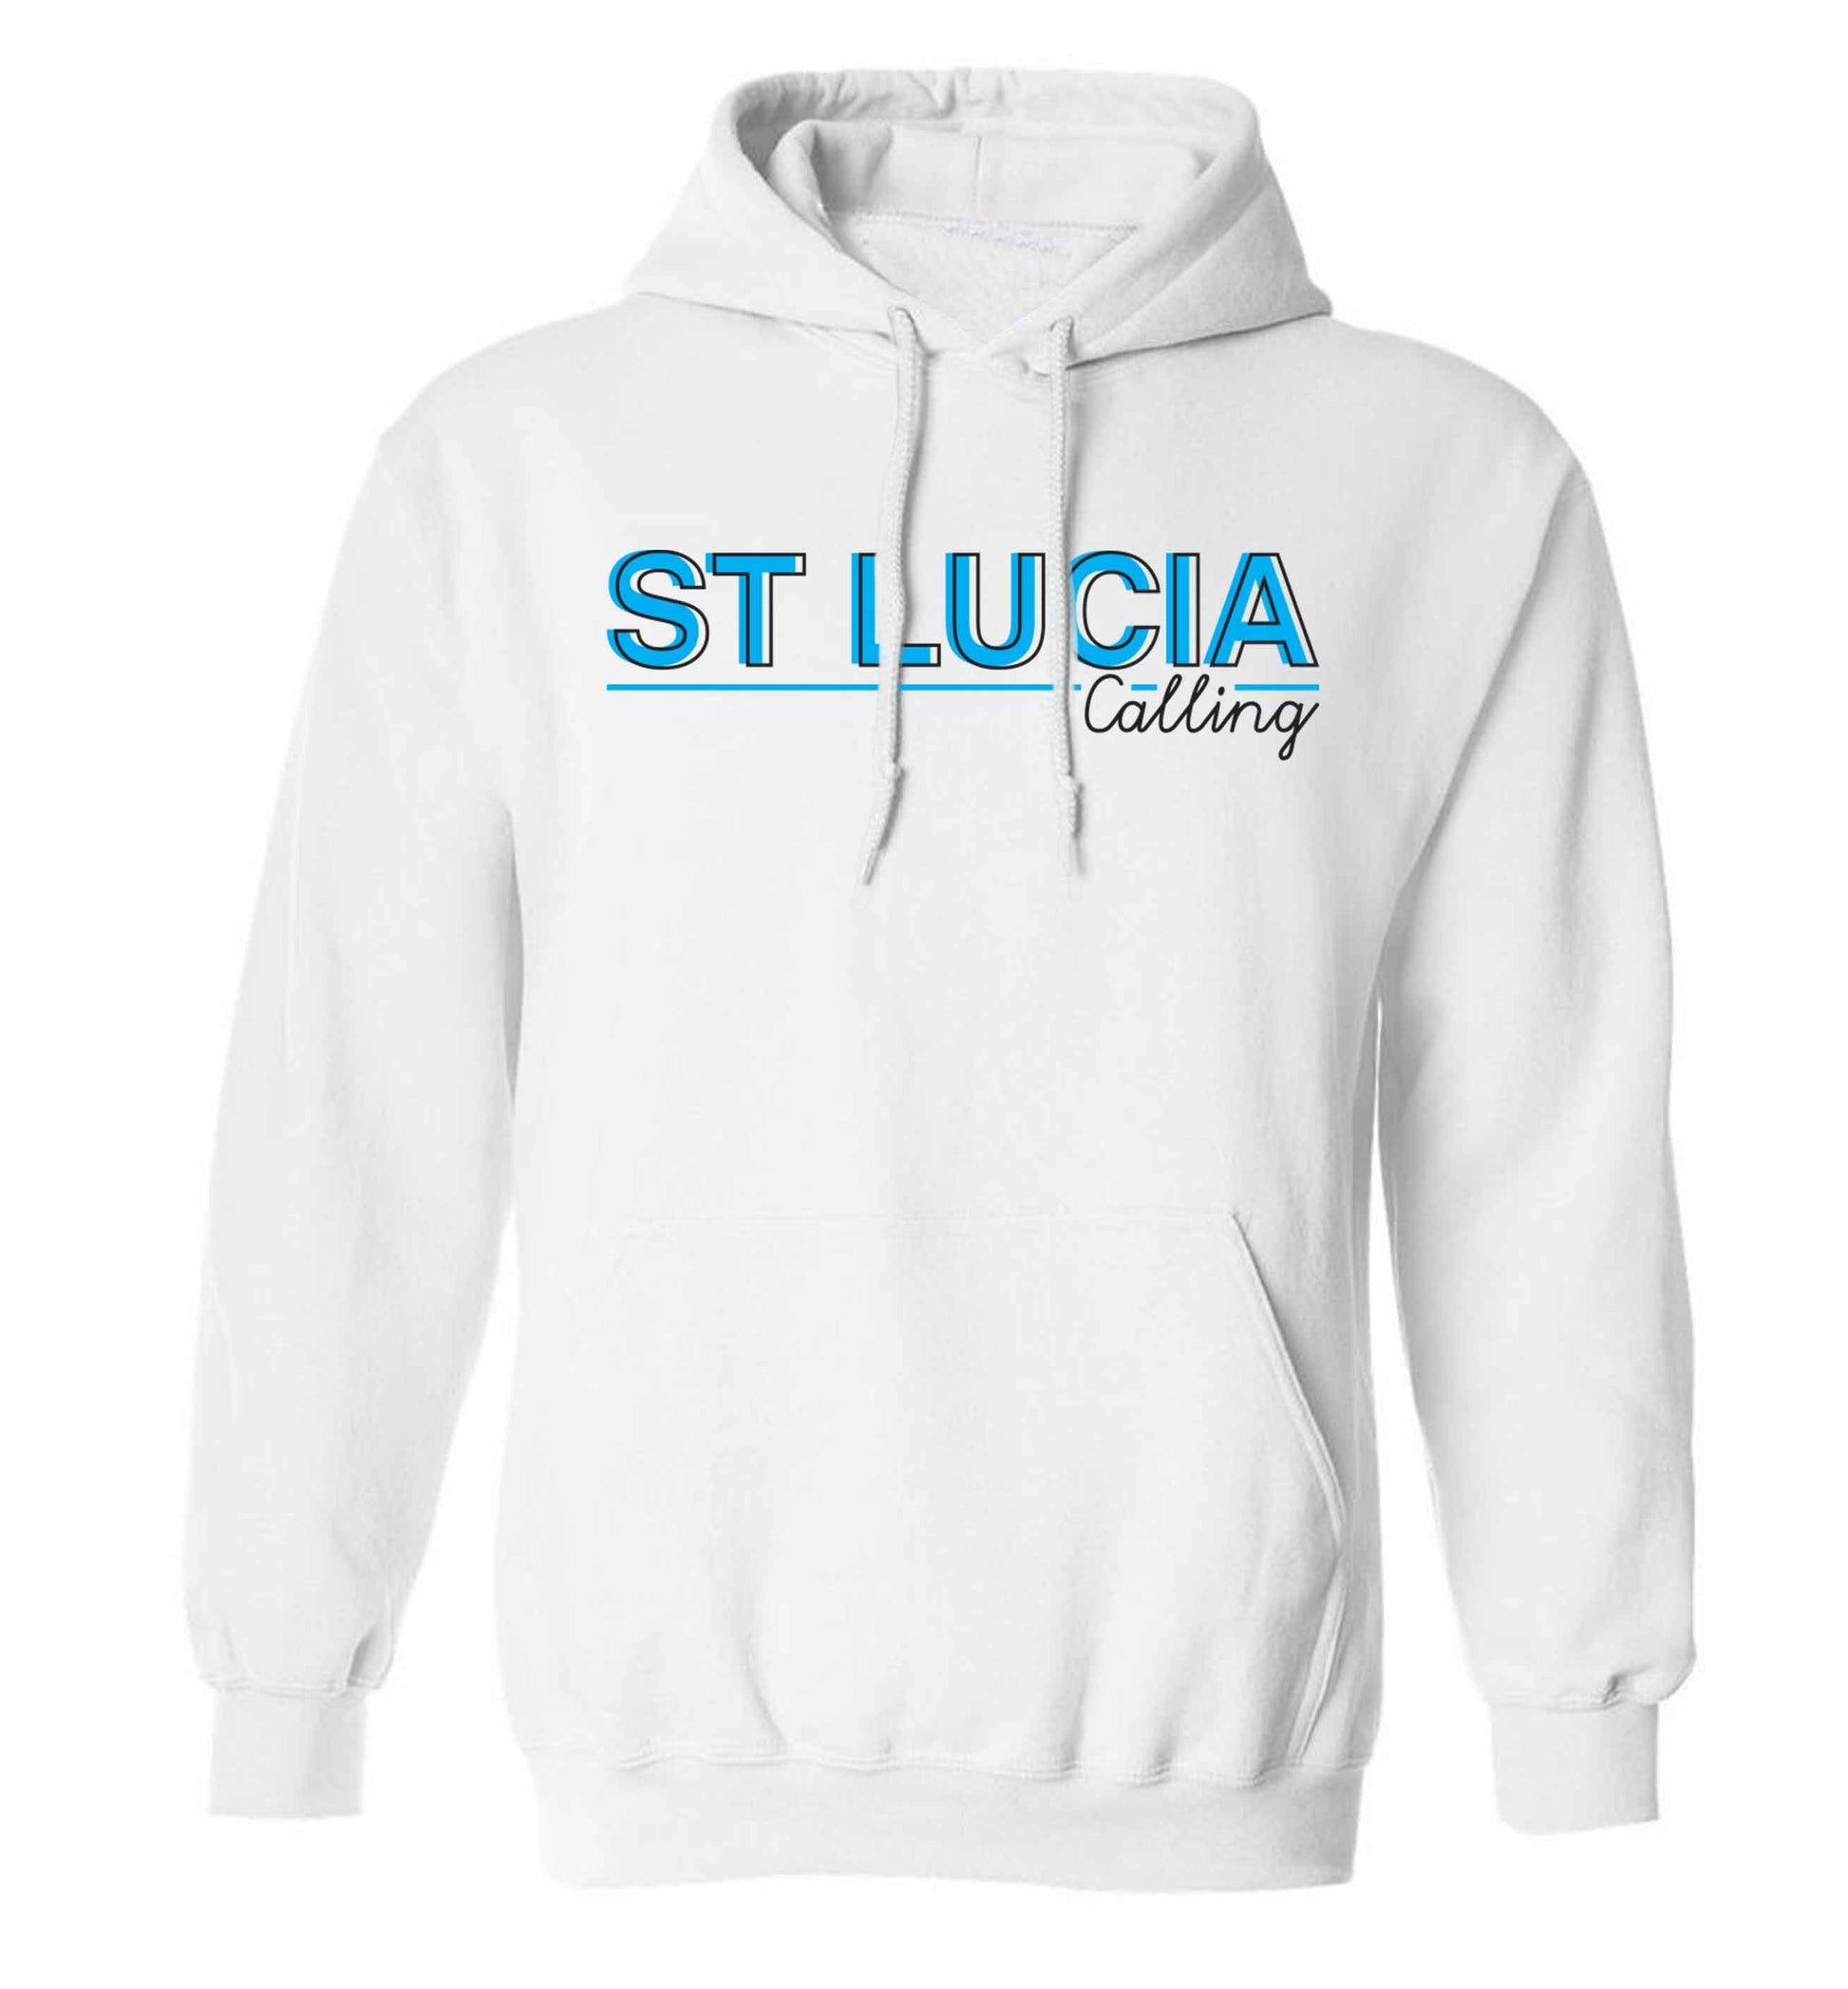 St Lucia calling adults unisex white hoodie 2XL